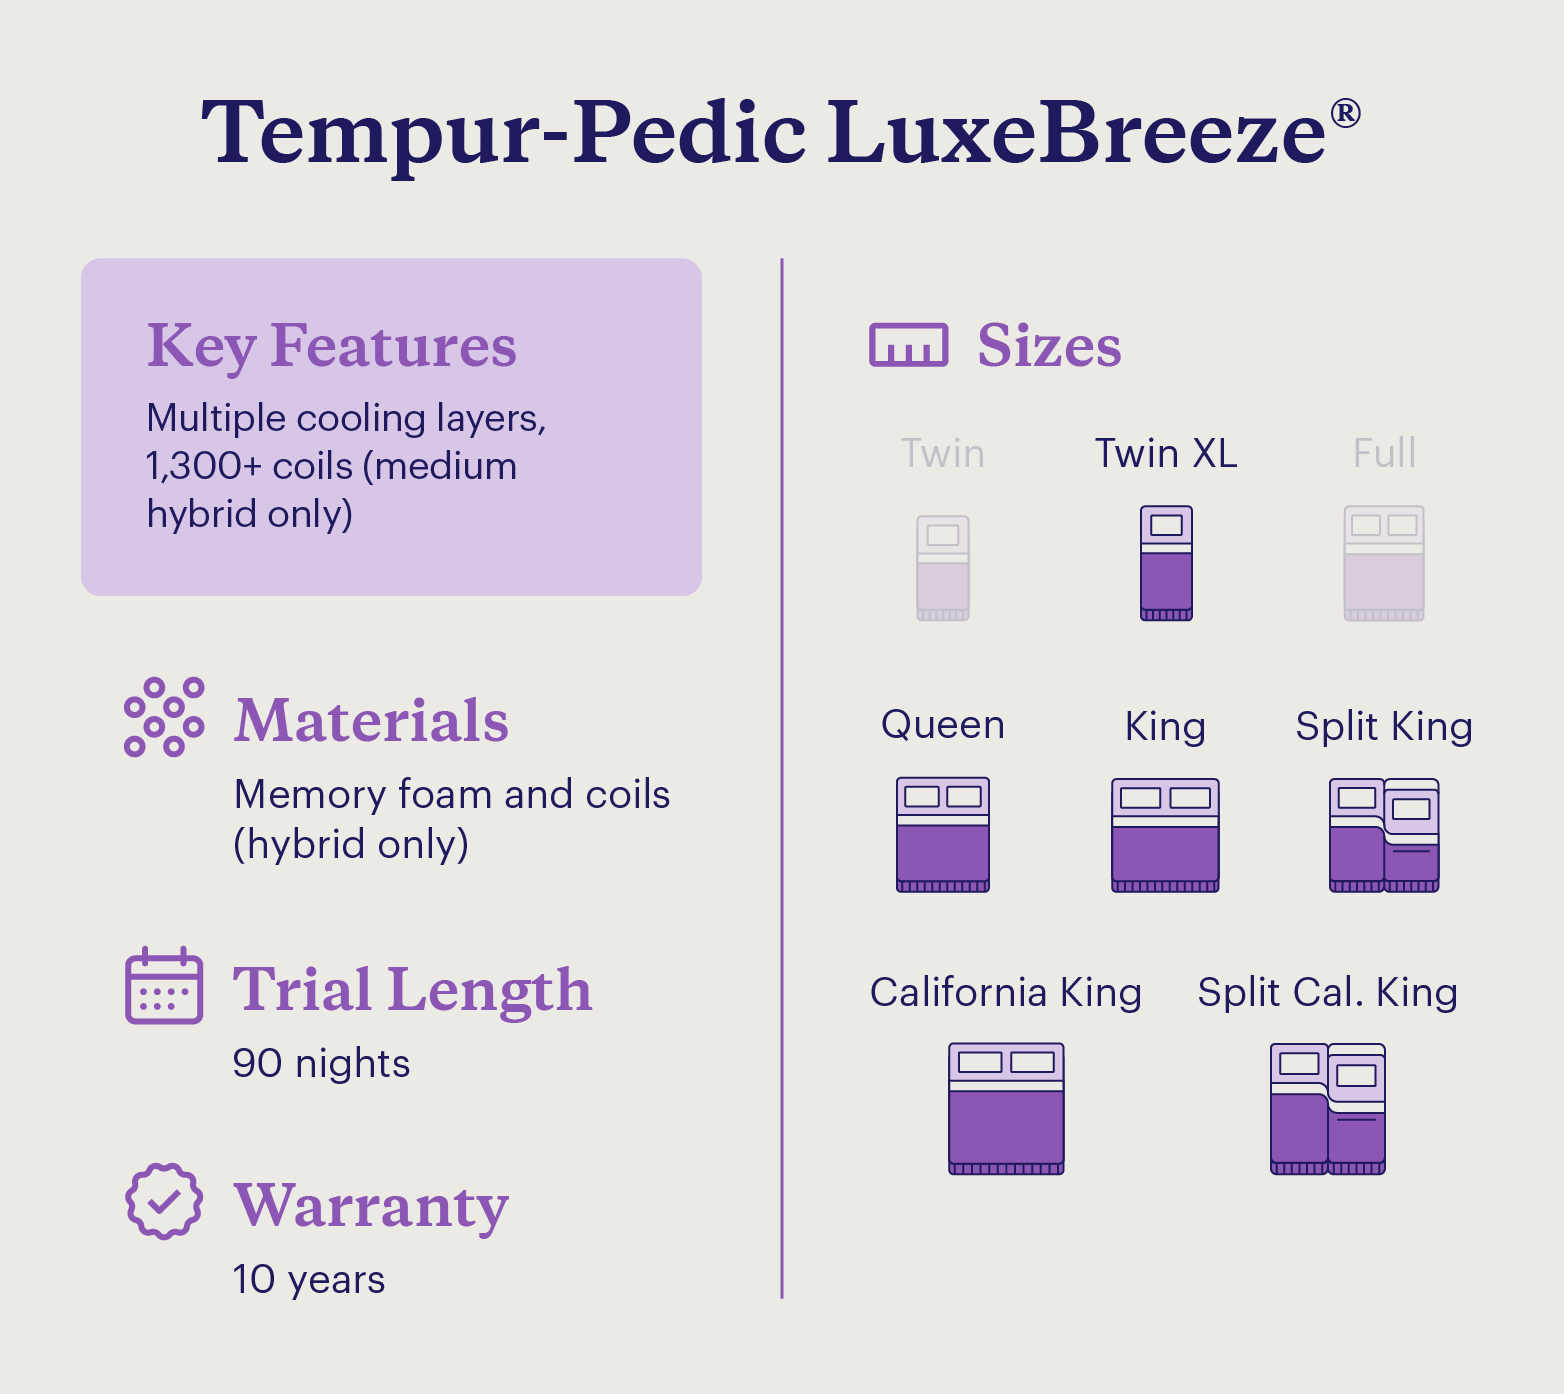 A graphic shows the key features and details of the Tempur-Pedic LuxeBreeze mattress.